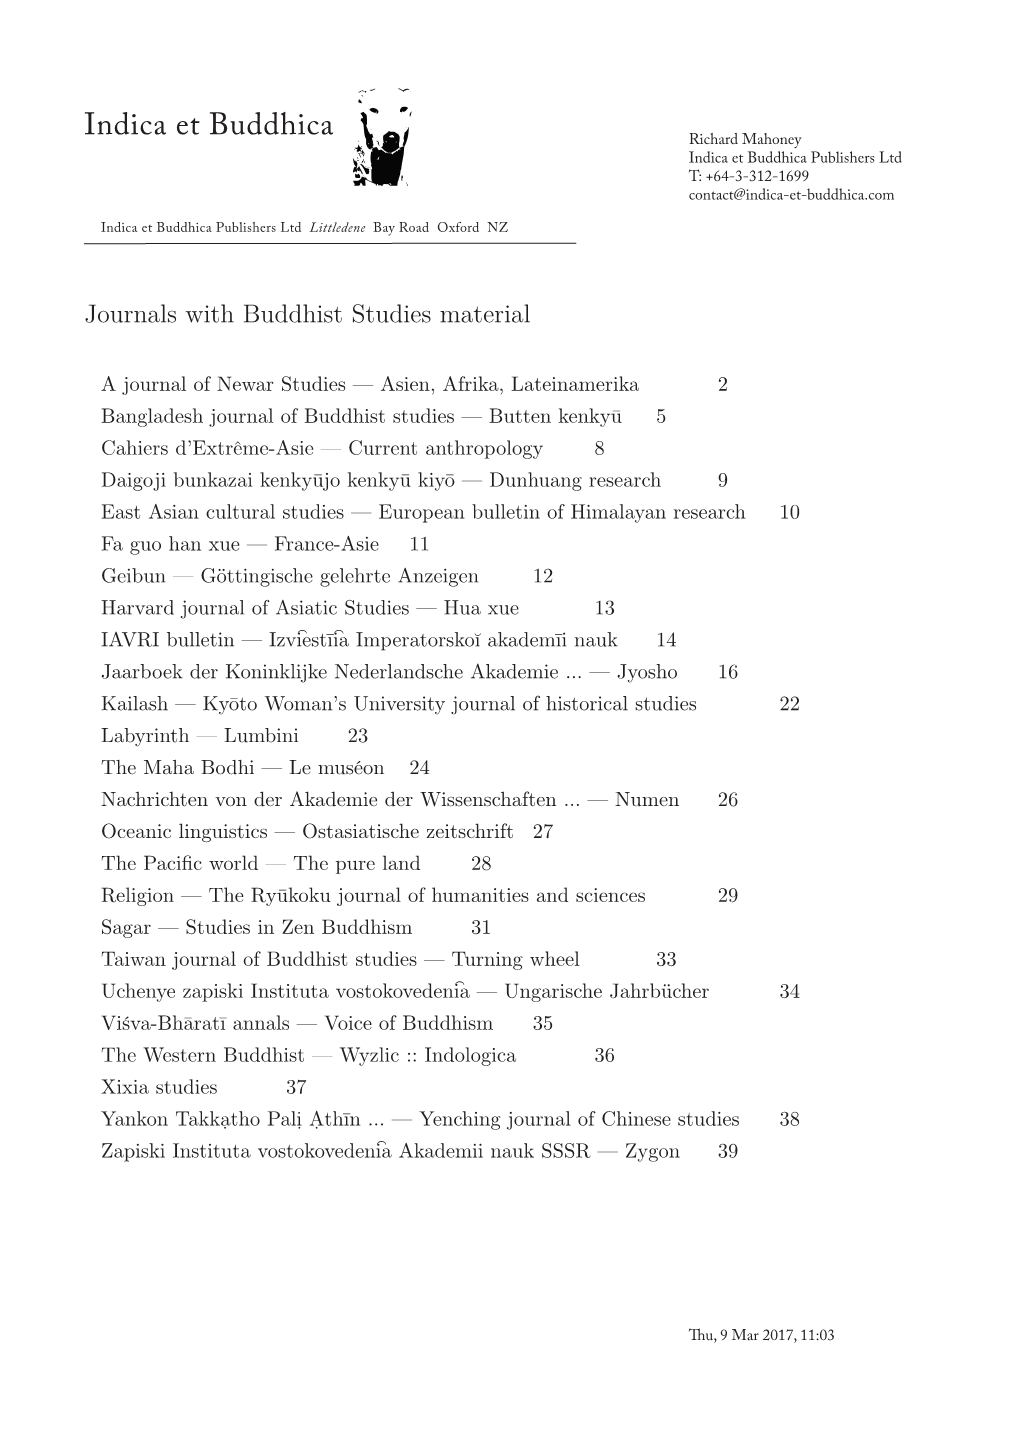 Indica Et Buddhica -- Journals with Buddhist Studies Material